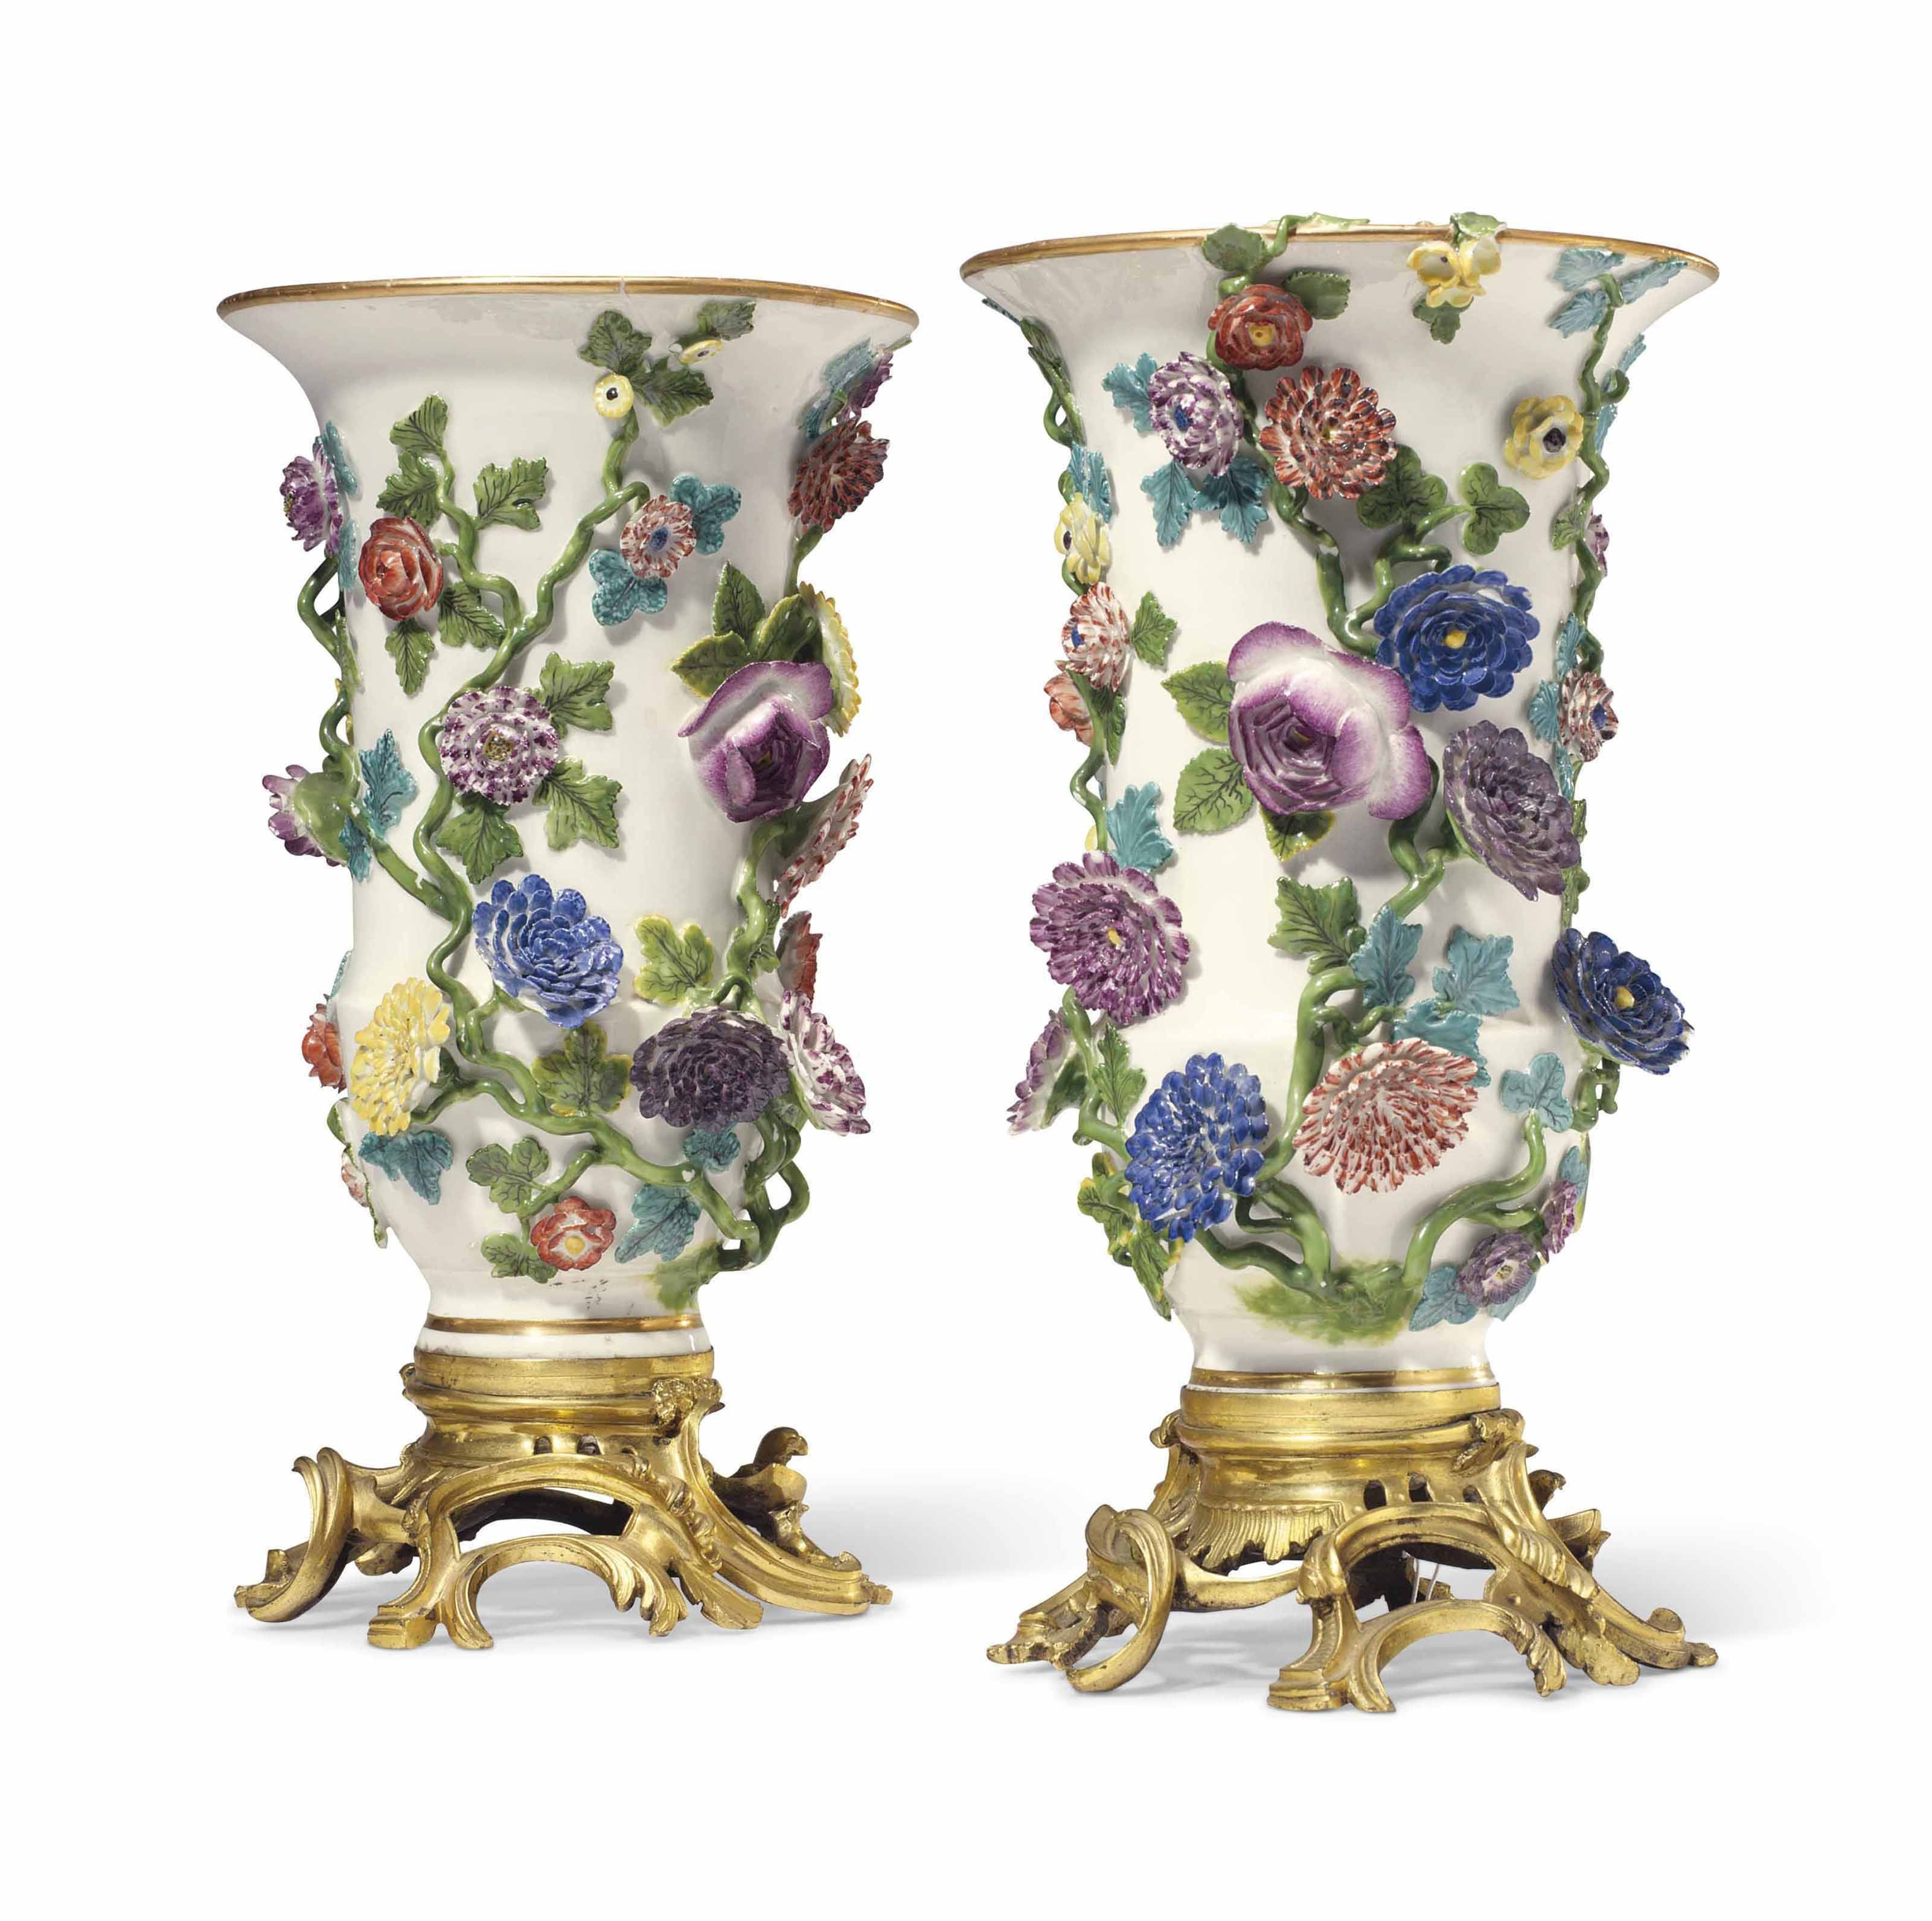 25 Unique Flower Vase Brass 2024 free download flower vase brass of 23 crystal beaded vase the weekly world within a pair of ormolu mounted meissen porcelain flower encrusted vases